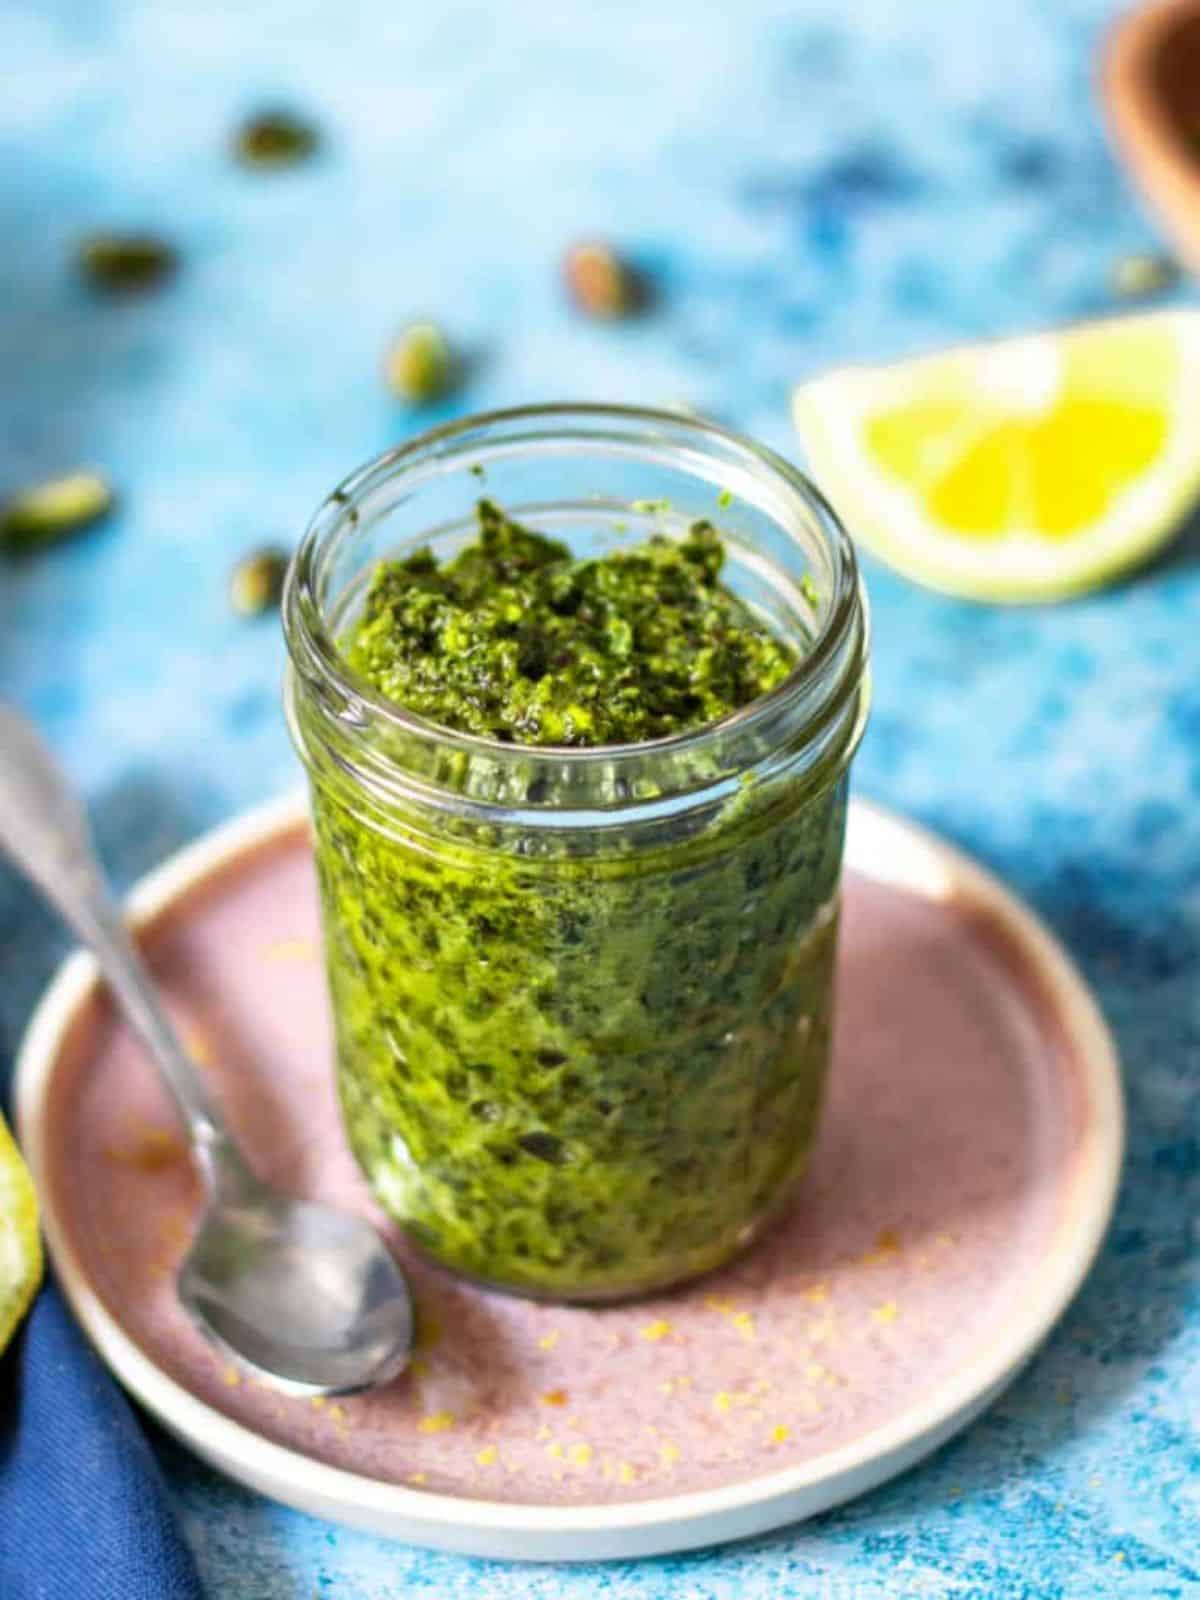 Pistachio Pesto in a glass jar on a small plate.